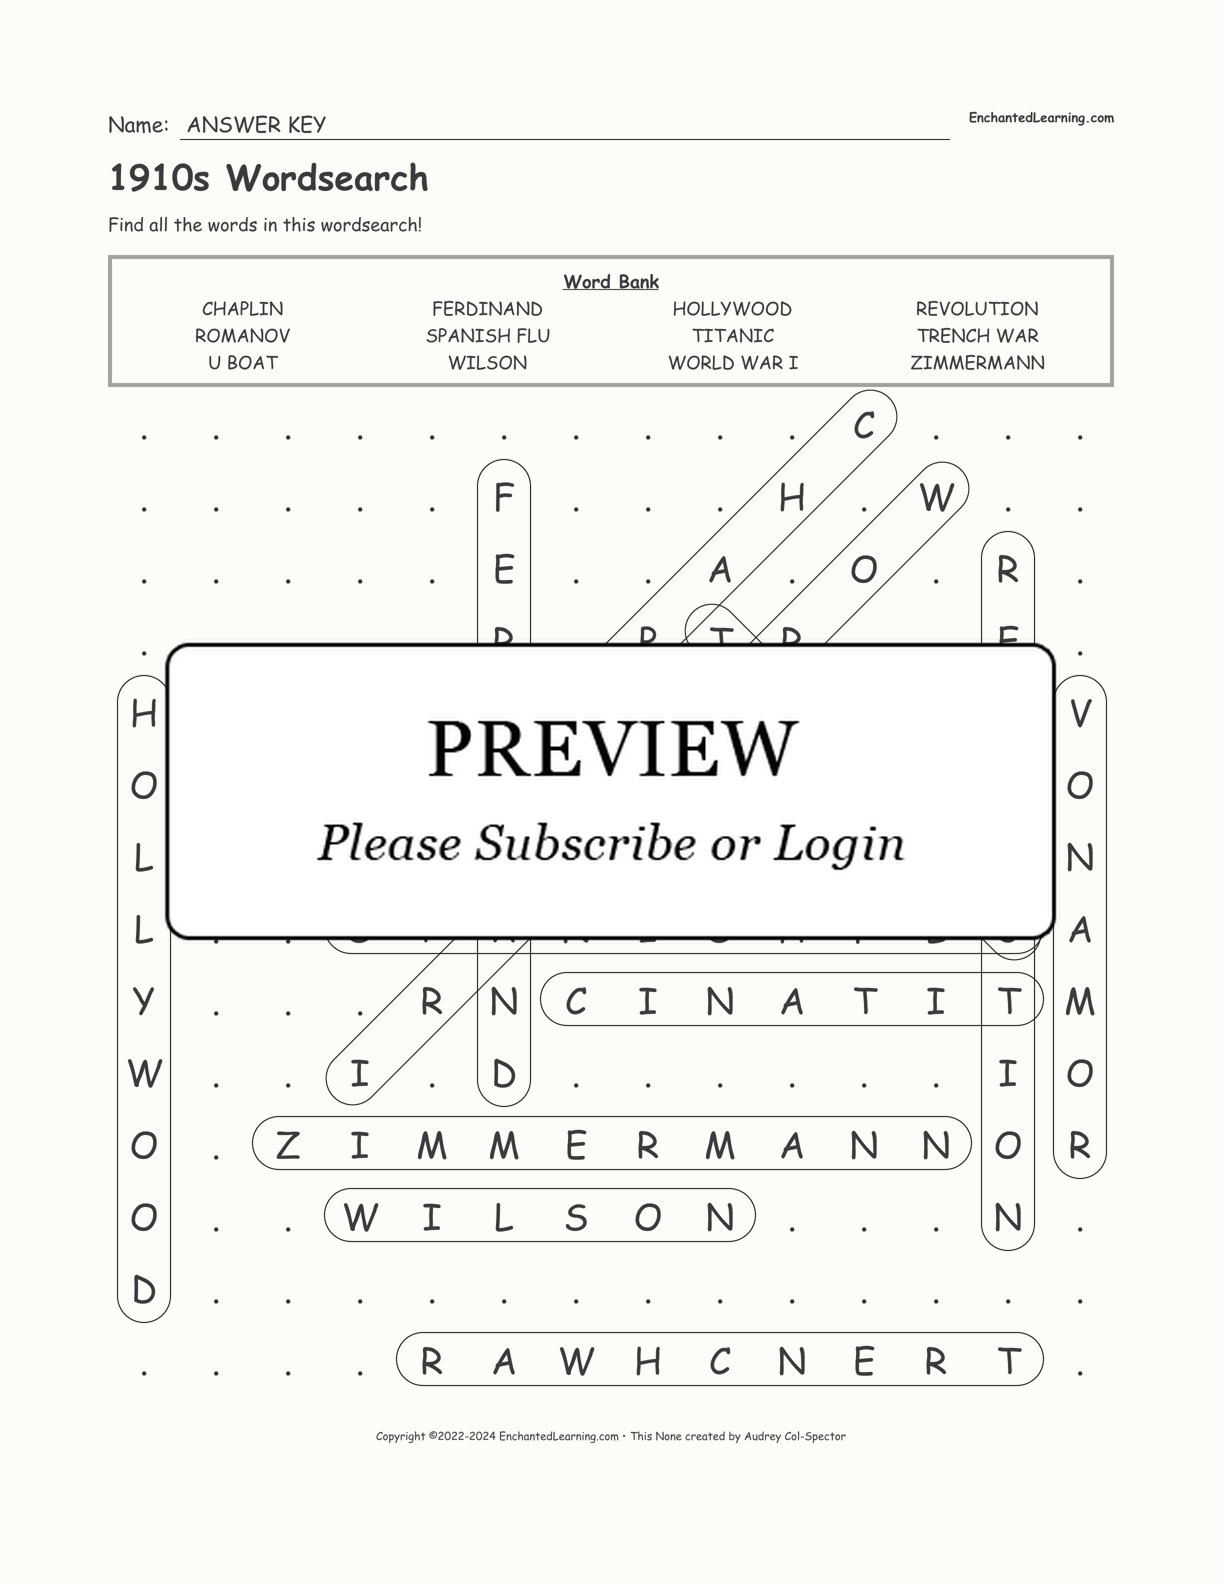 1910s Wordsearch interactive worksheet page 2